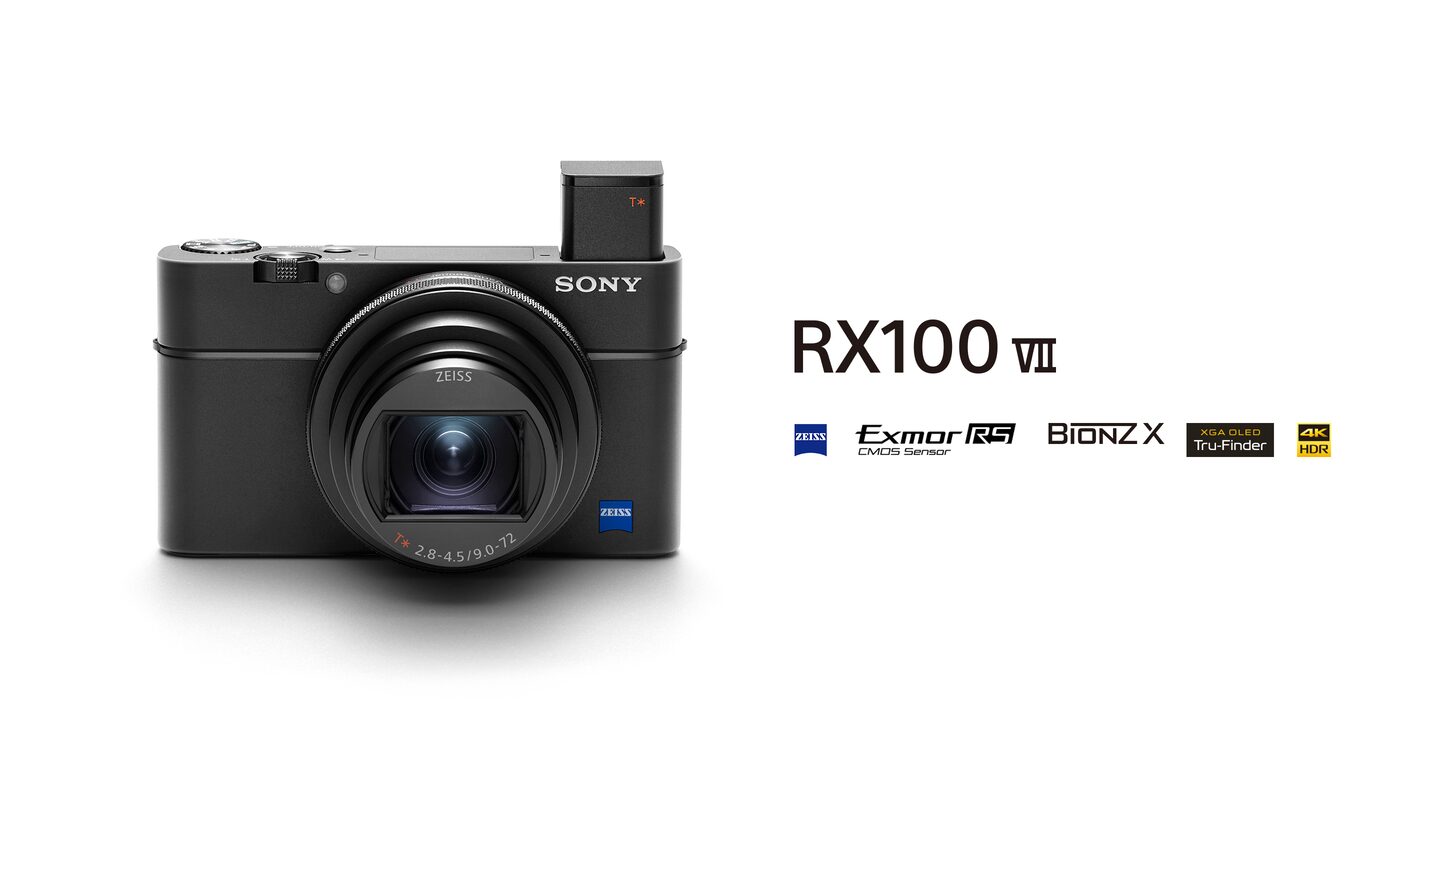 Sony releases the RX100 VII, a new compact with full-frame powers - NotebookCheck.net News